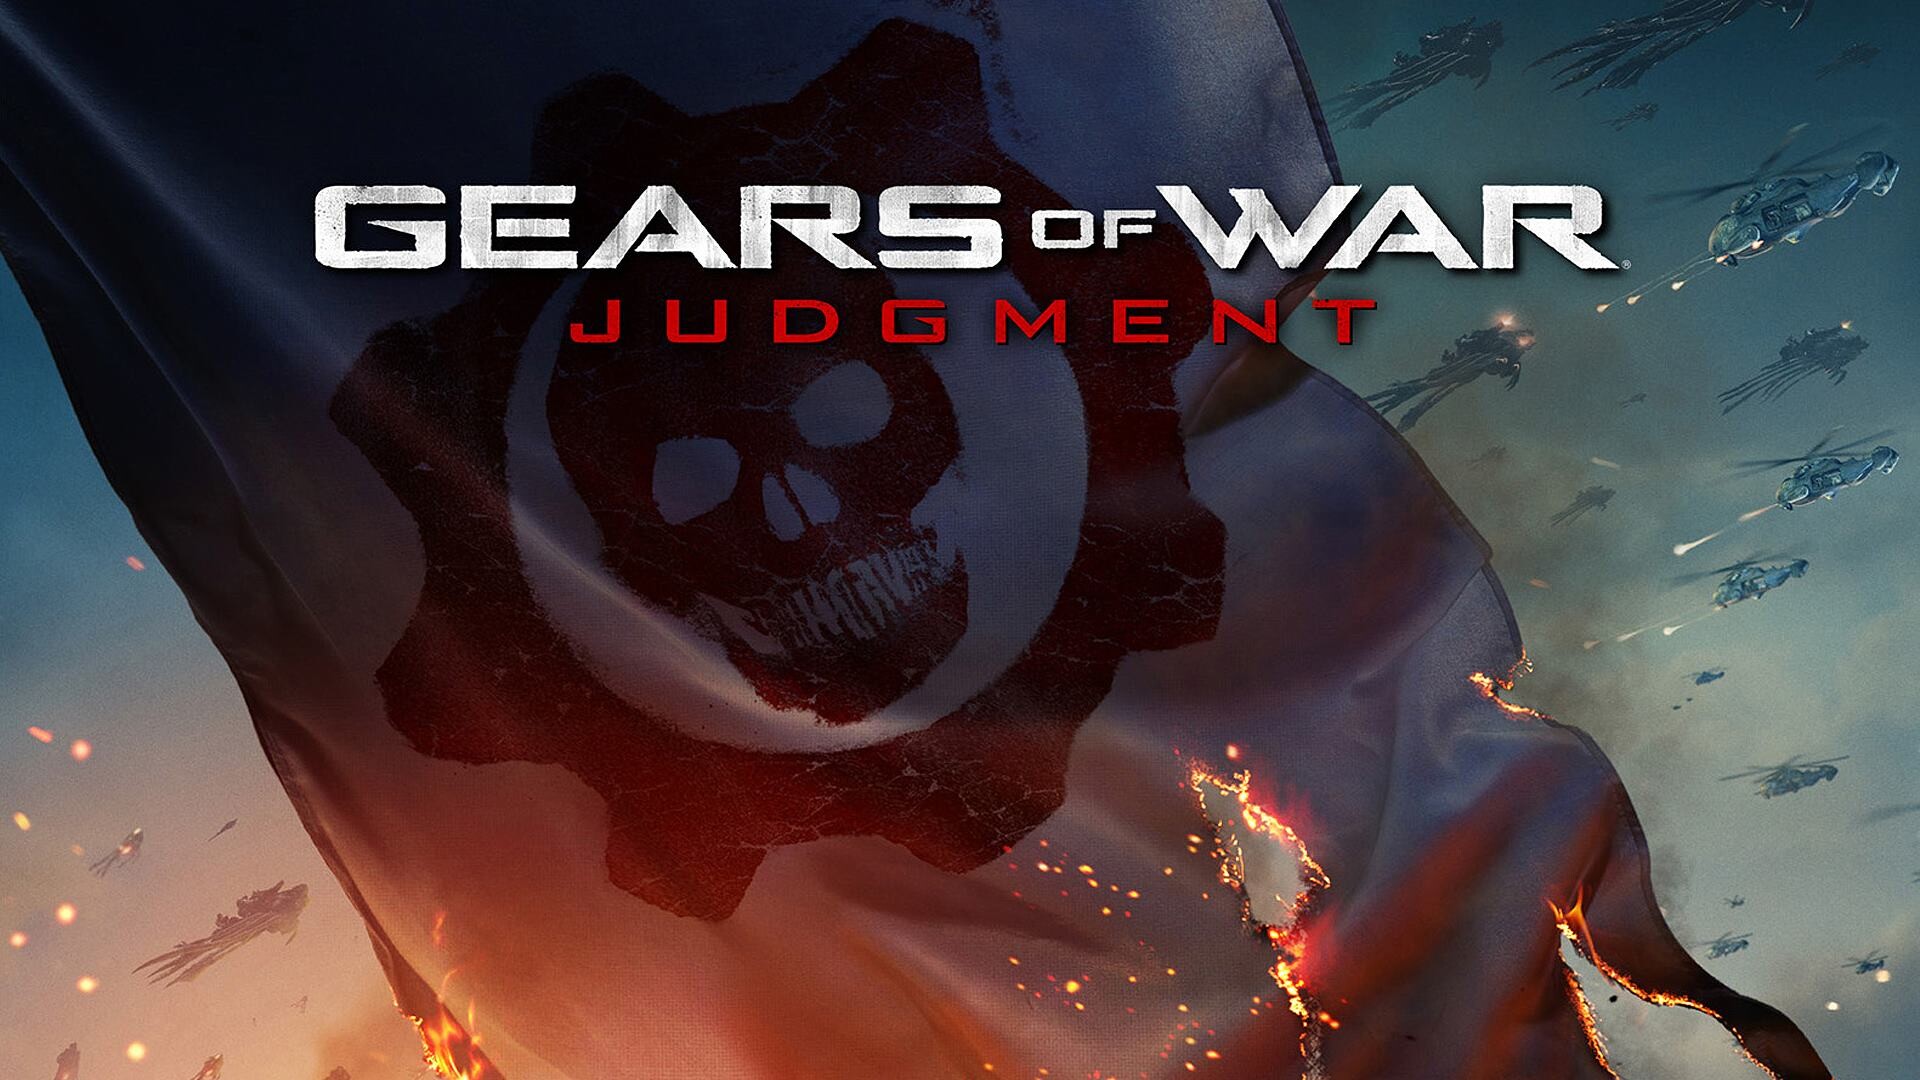 Gears of War: Judgment: A third-person shooter video game developed by People Can Fly and Epic Games. 1920x1080 Full HD Wallpaper.